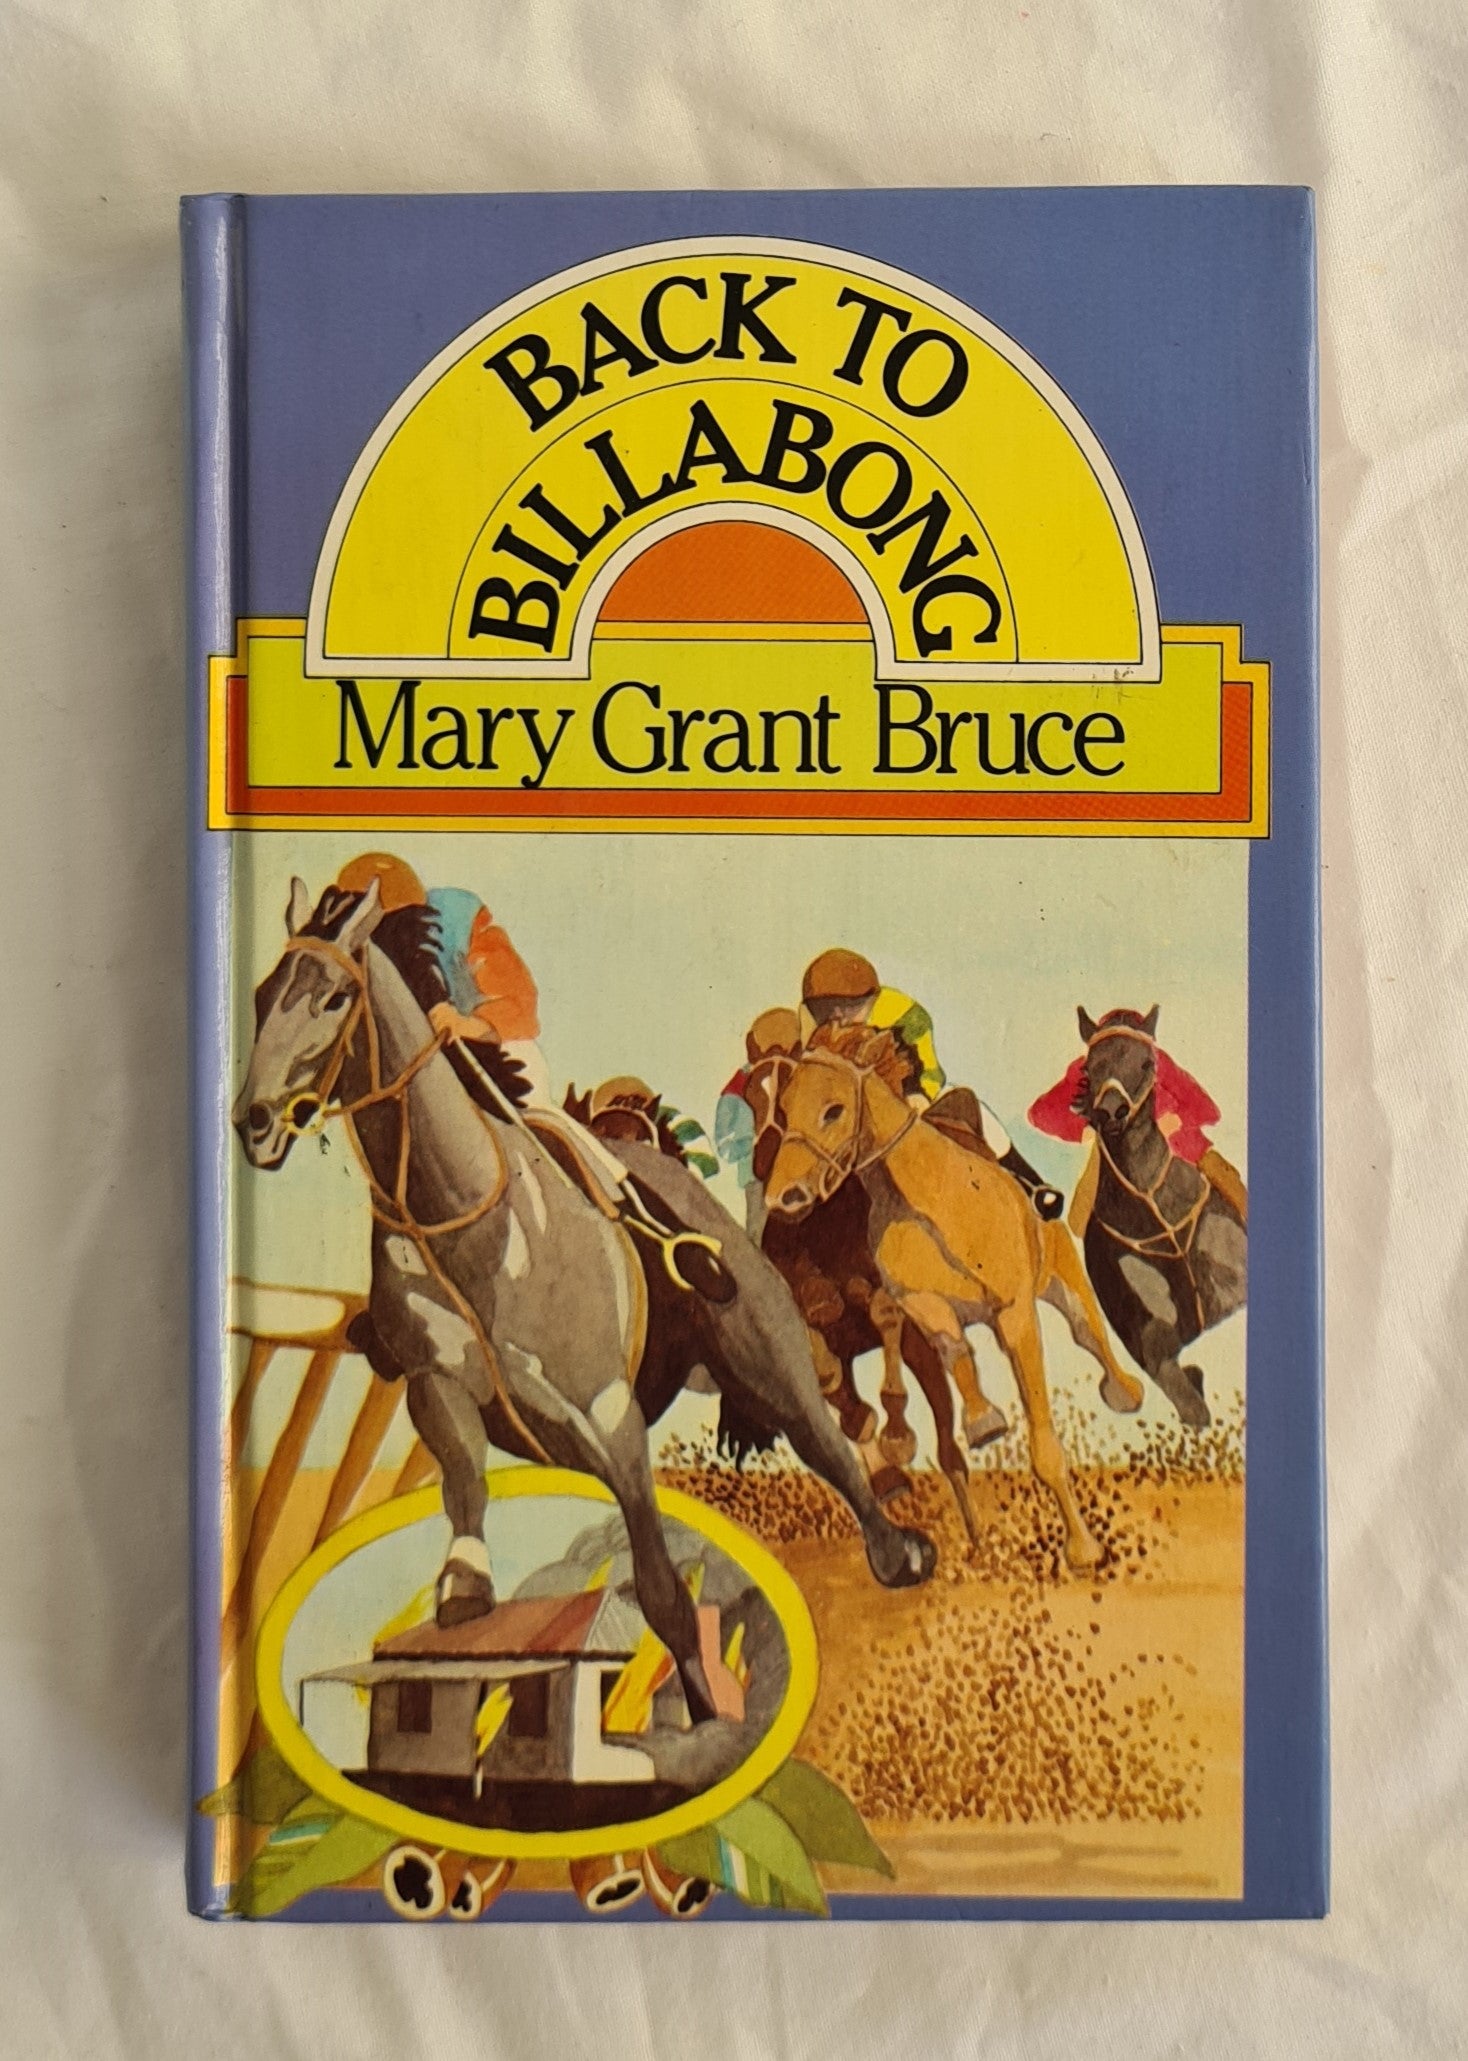 Back to Billabong  by Mary Grant Bruce  The Billabong Books